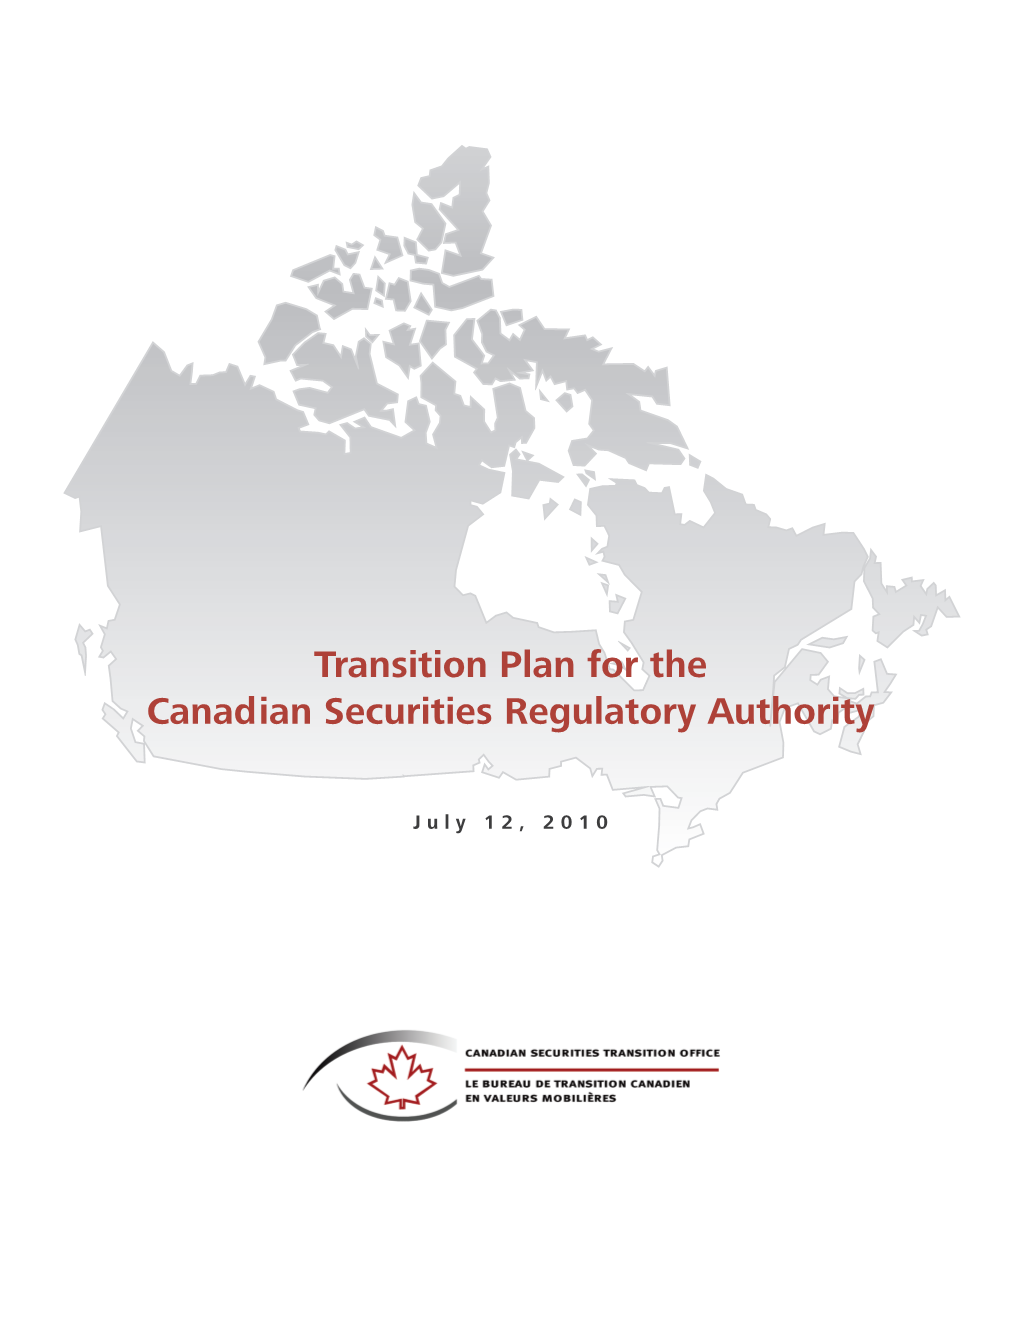 Transition Plan for the Canadian Securities Regulatory Authority